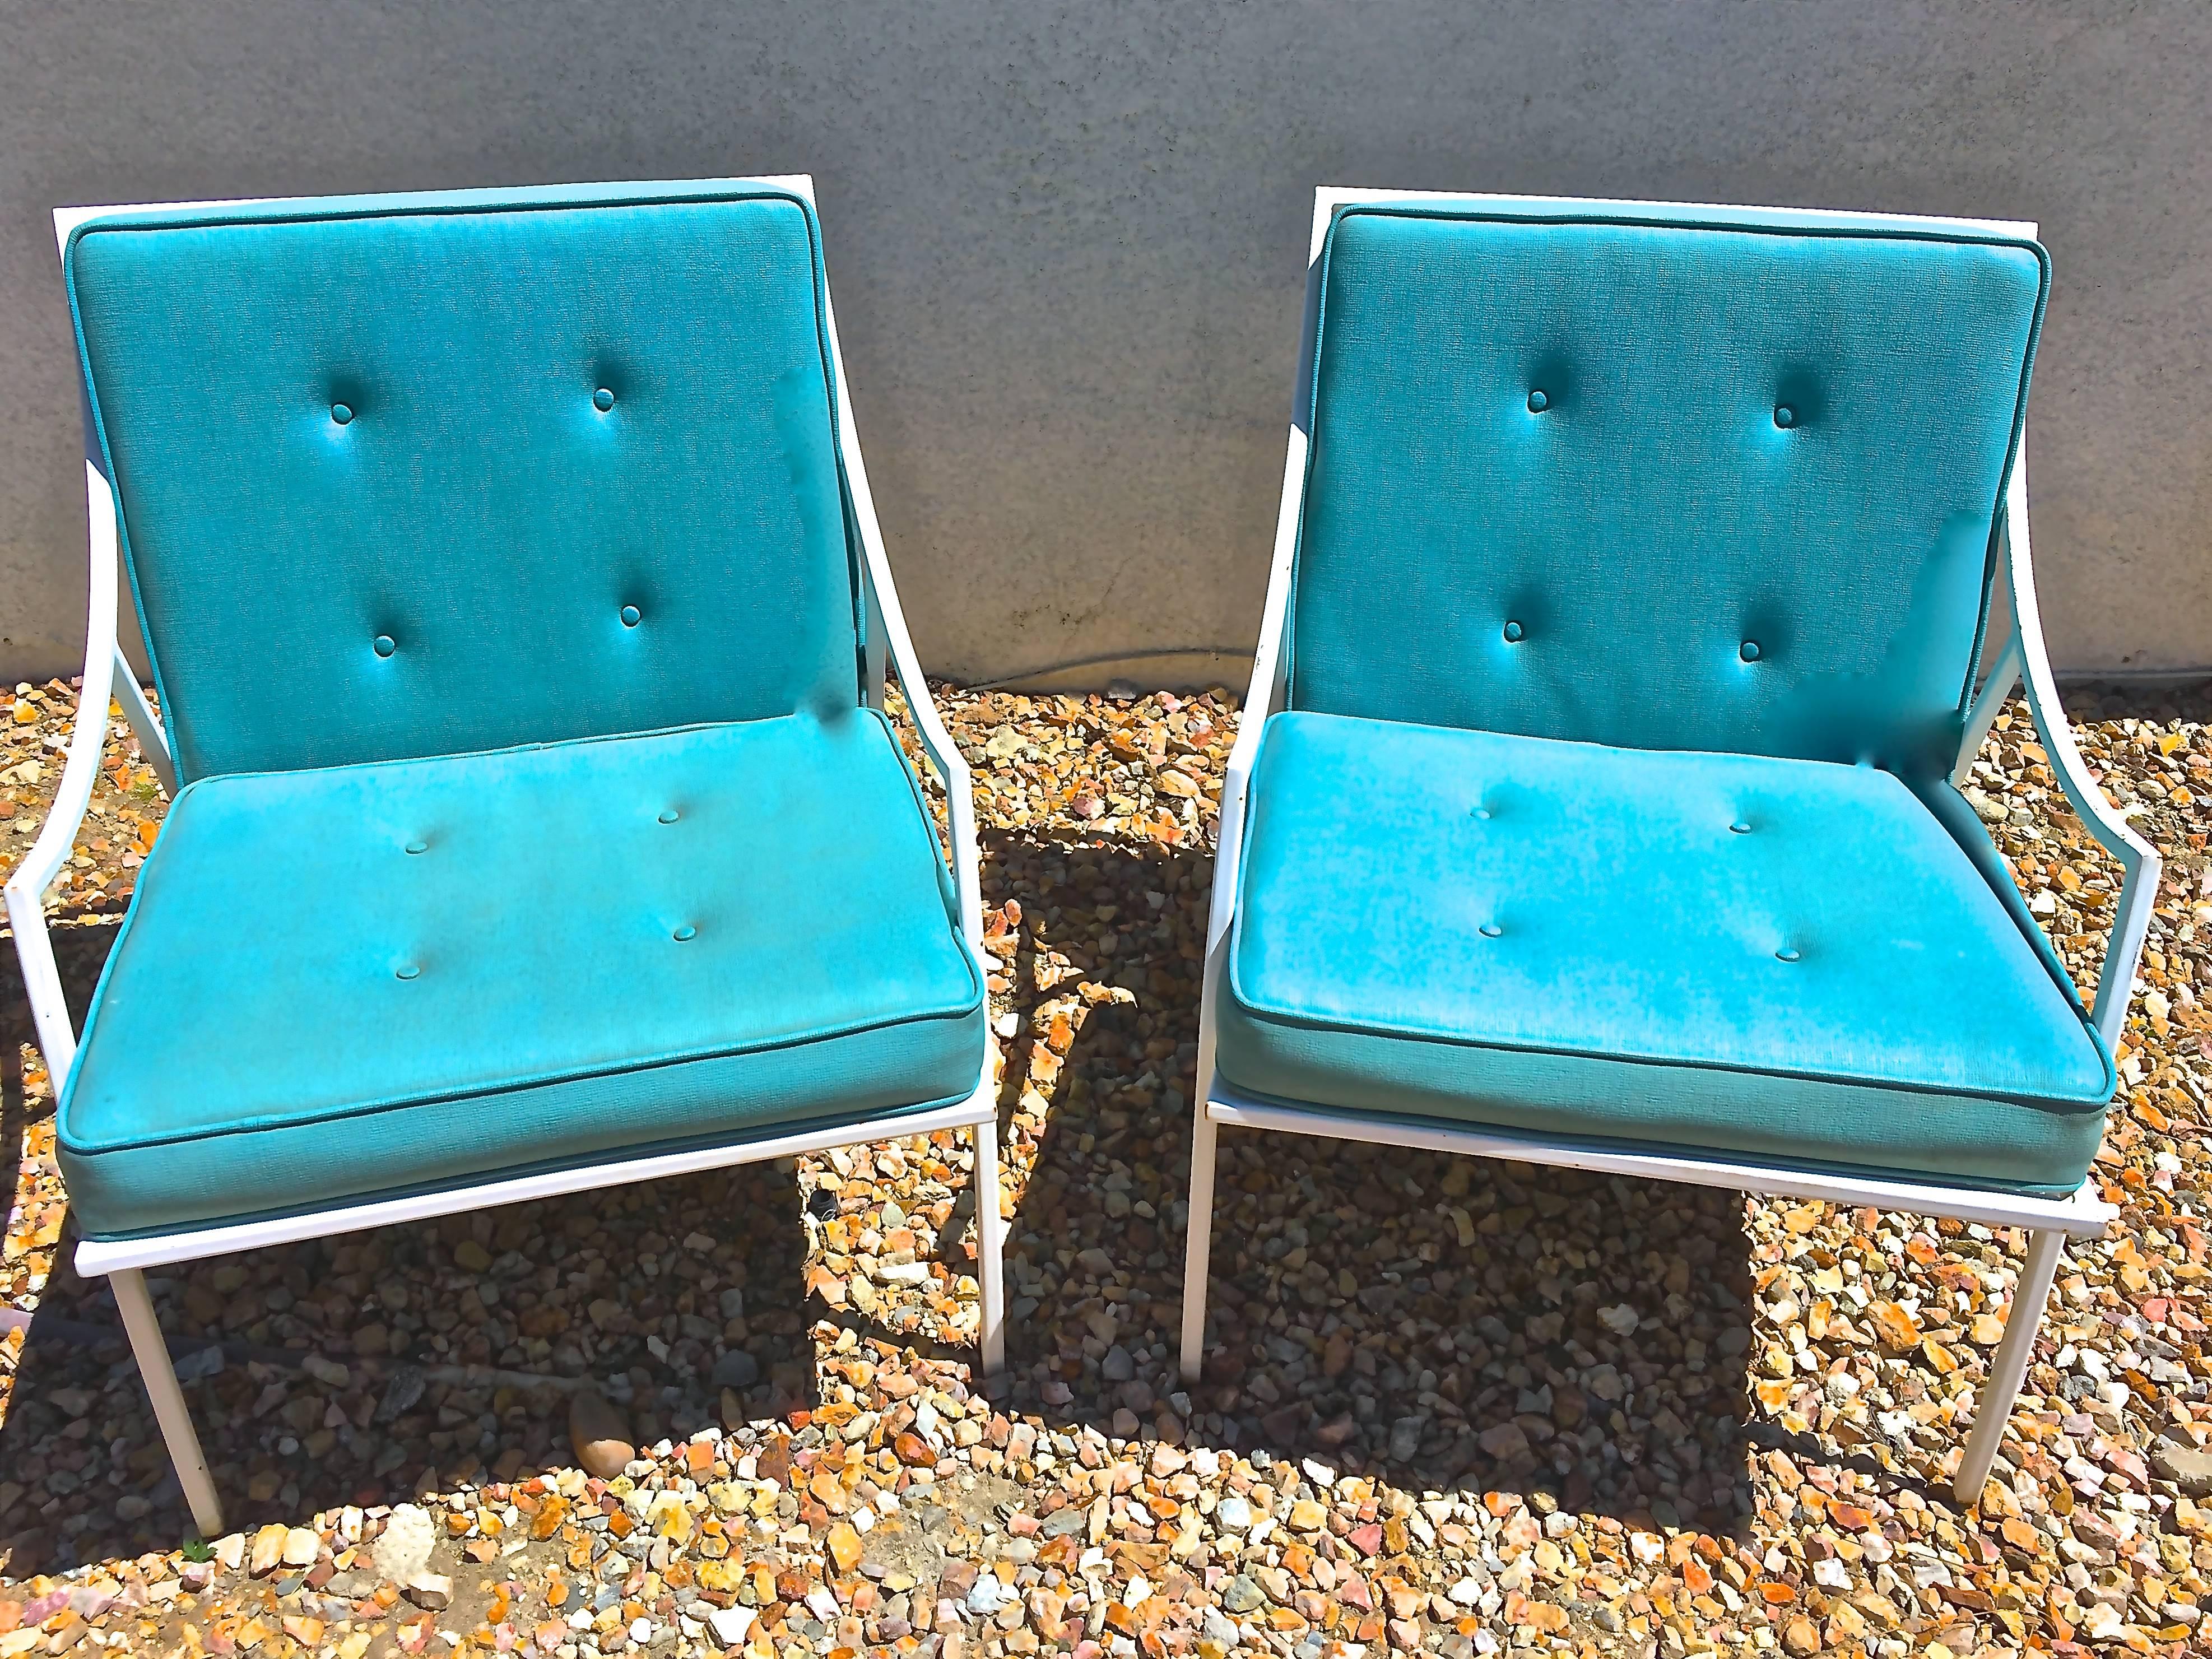 Hollywood Regency pair of patio armchairs are striking in their graceful simplicity. Perfect choice for any Mid-Century Modern setting or as a transitional patio seating choice. Powder-coated in pure white, the aqua seat cushions are original with